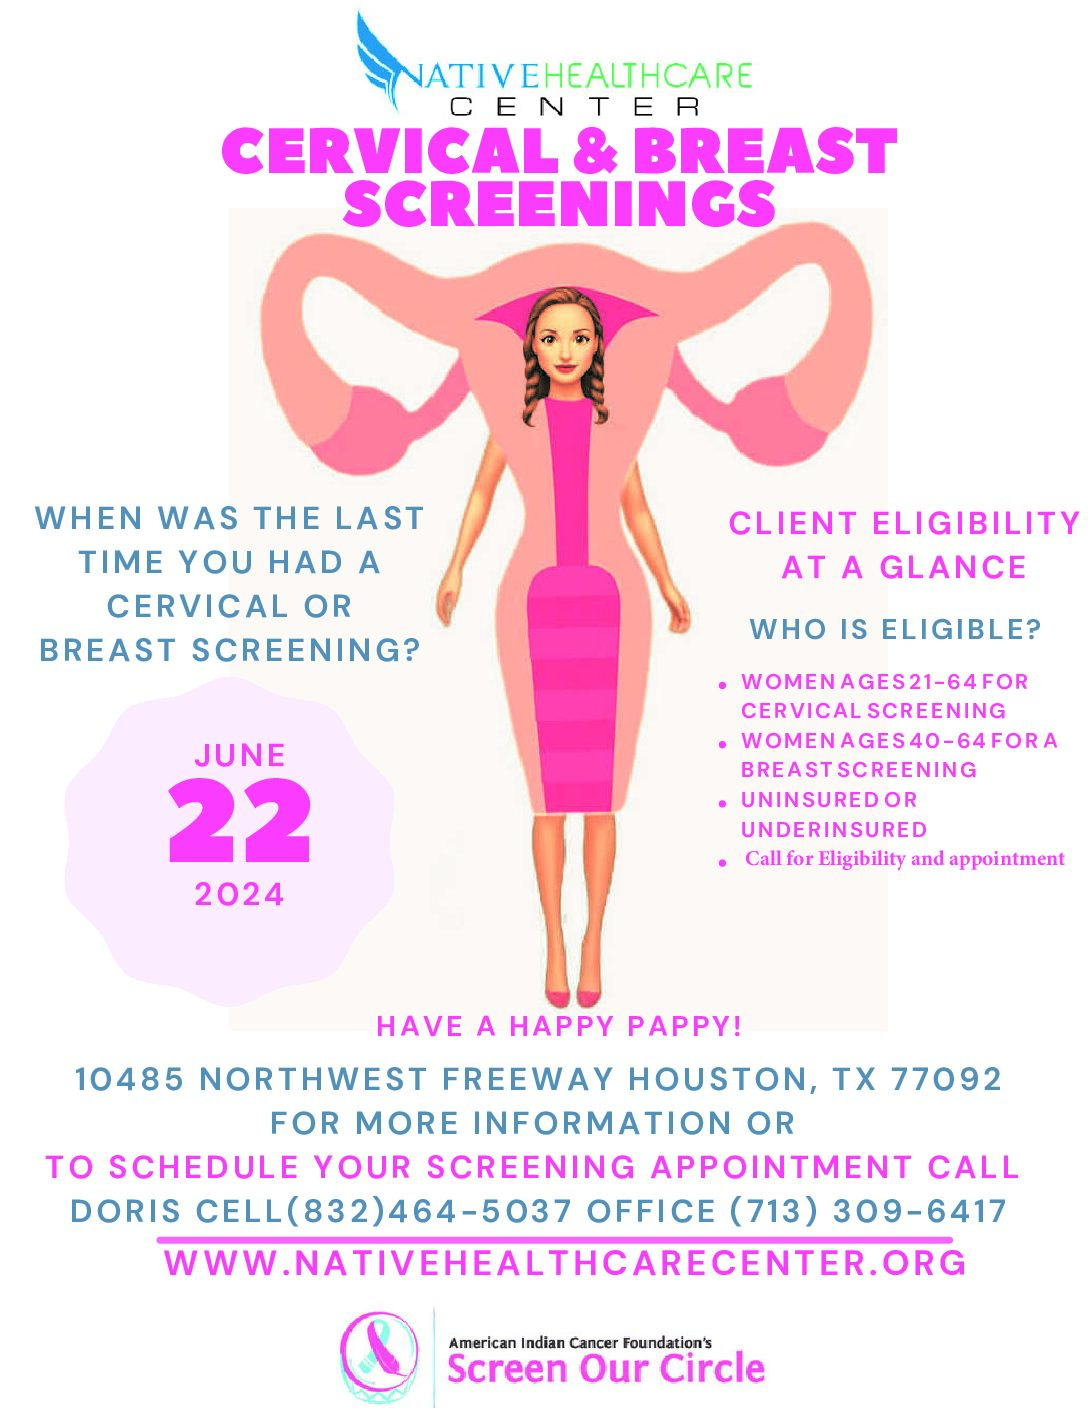 Tunica-Biloxi Tribe of Louisiana Announces Free Cervical and Breast Cancer Screening Program in Texas